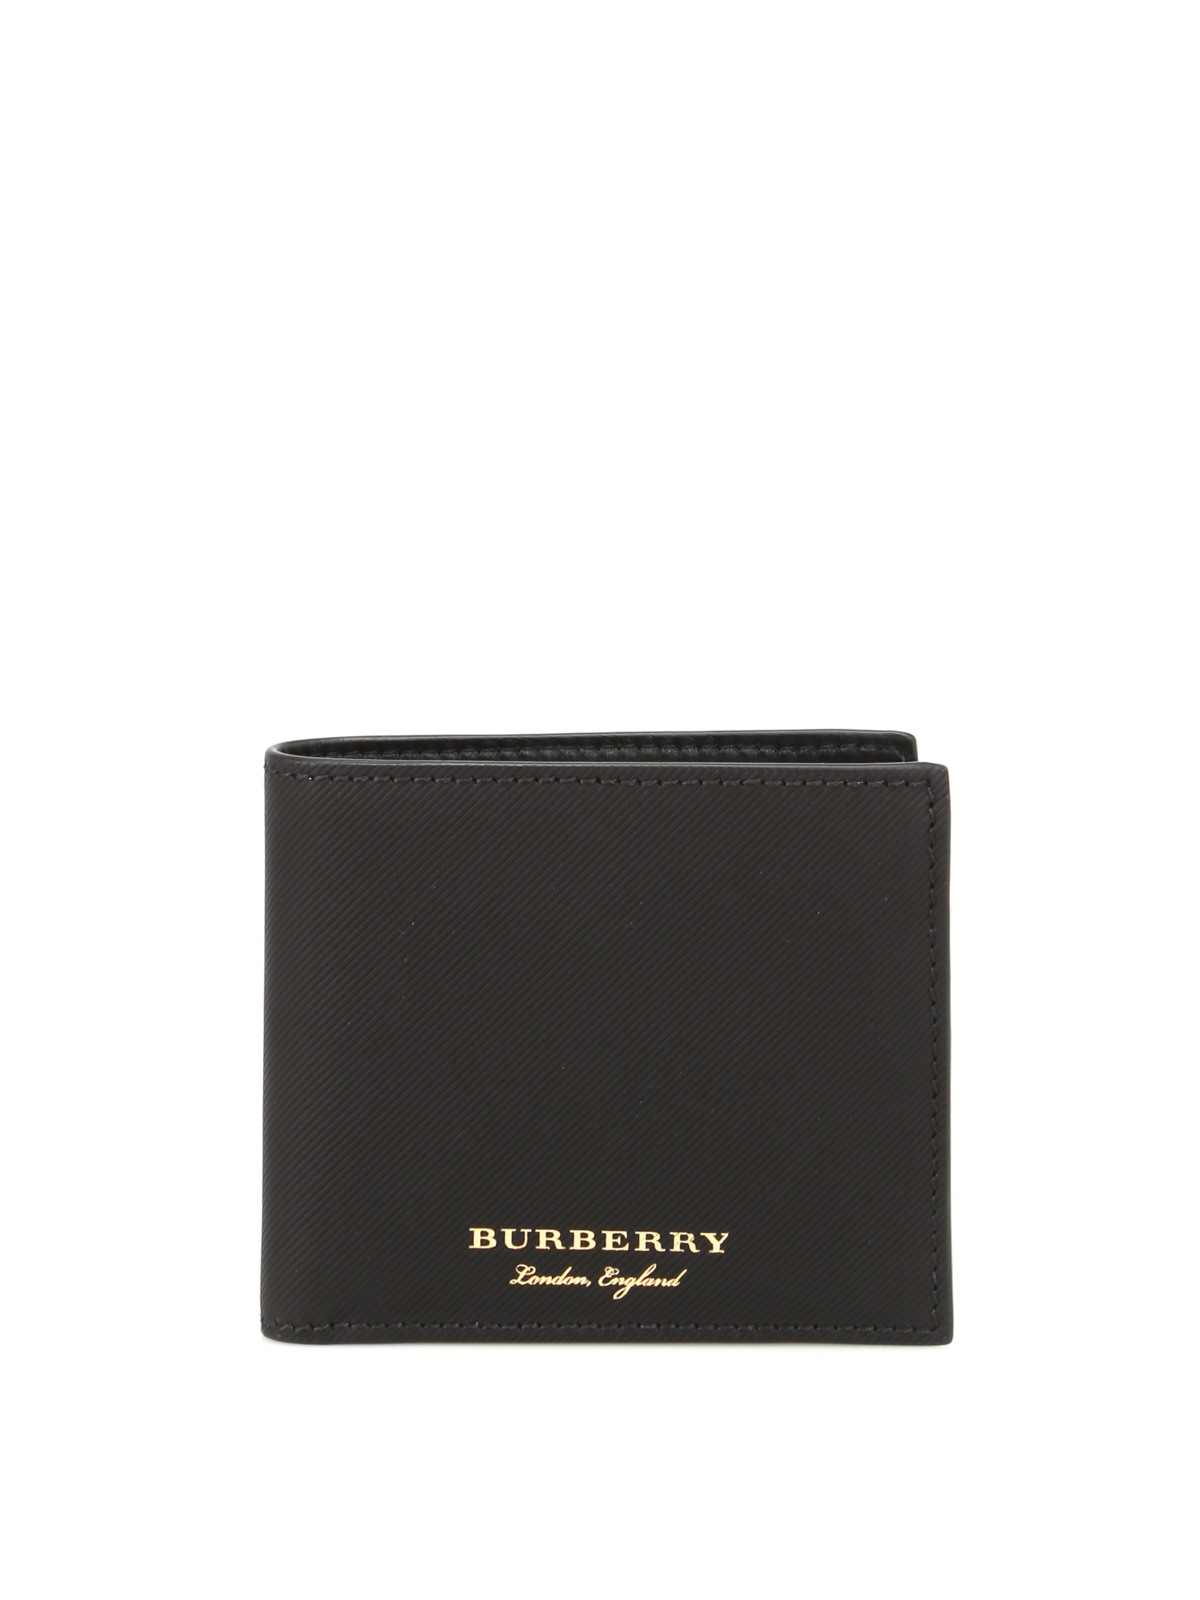 burberry trench leather wallet